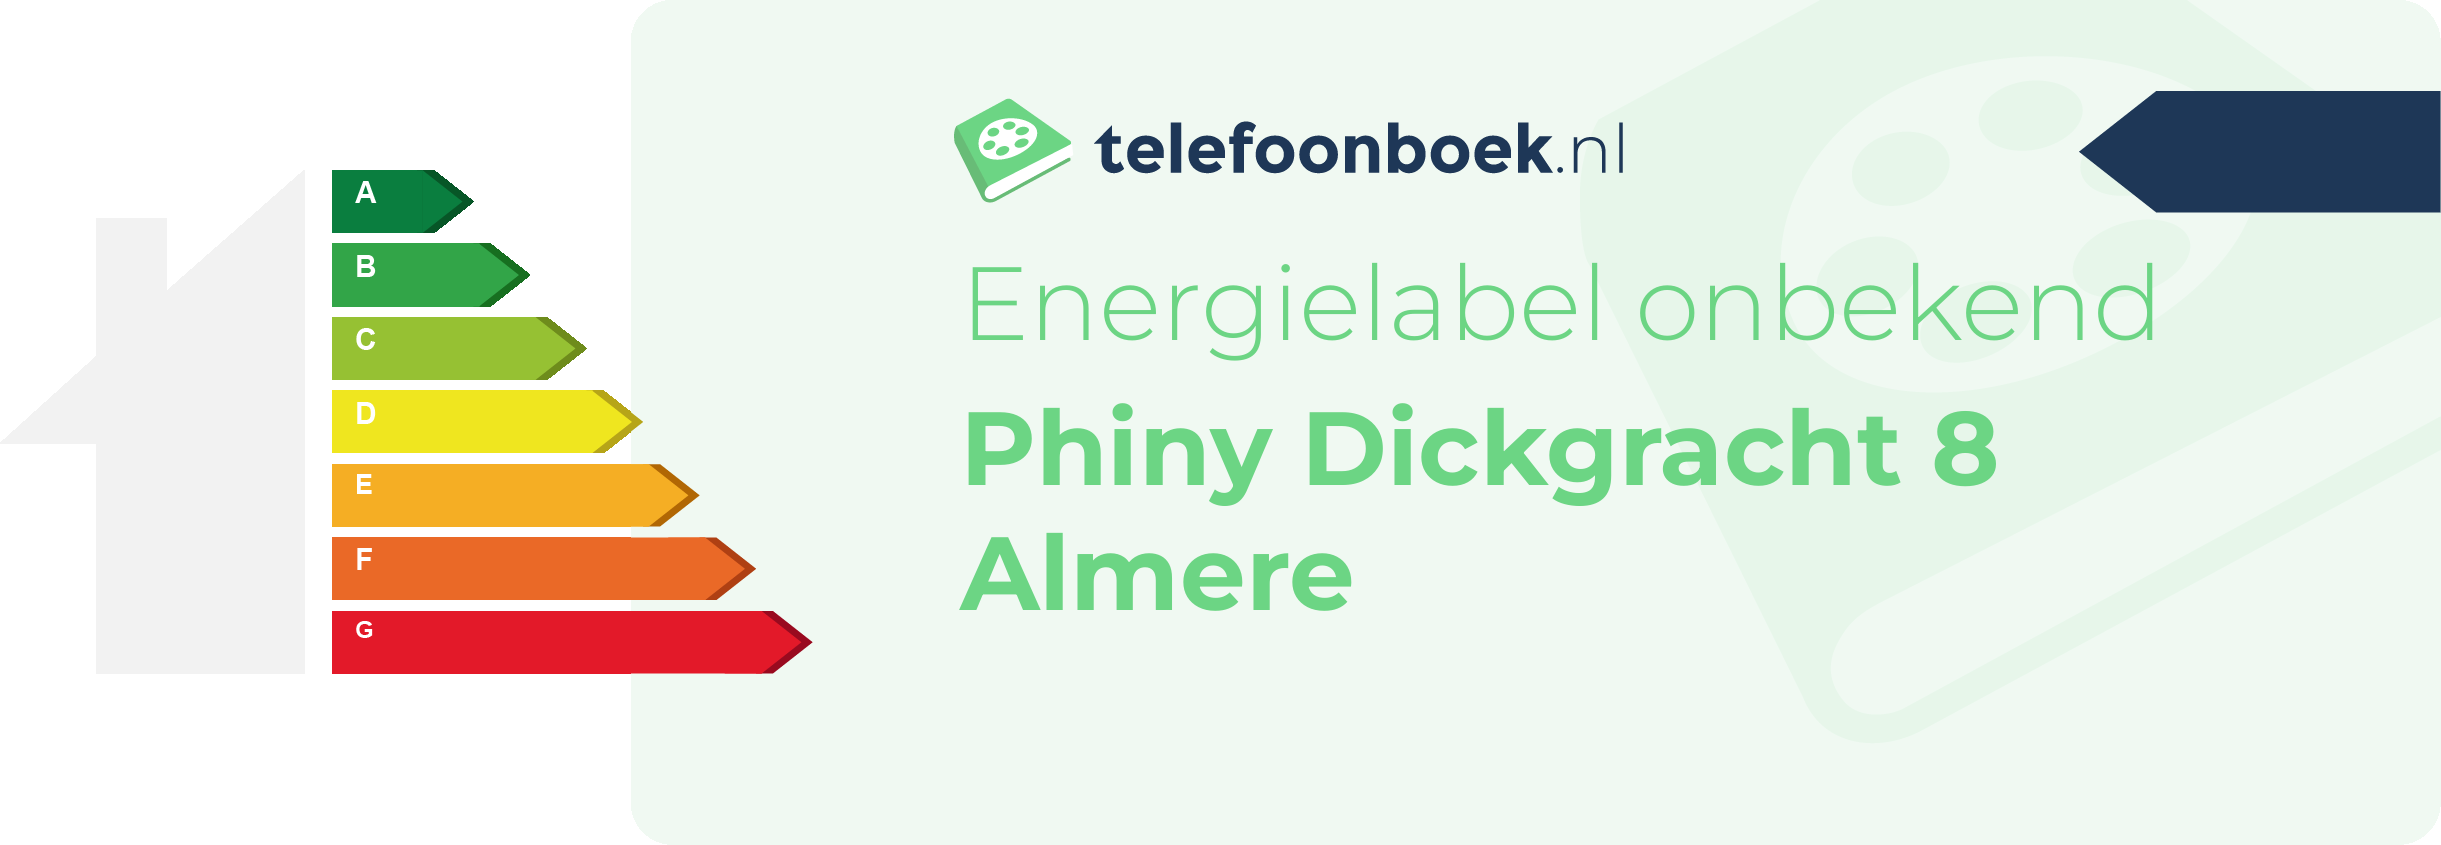 Energielabel Phiny Dickgracht 8 Almere